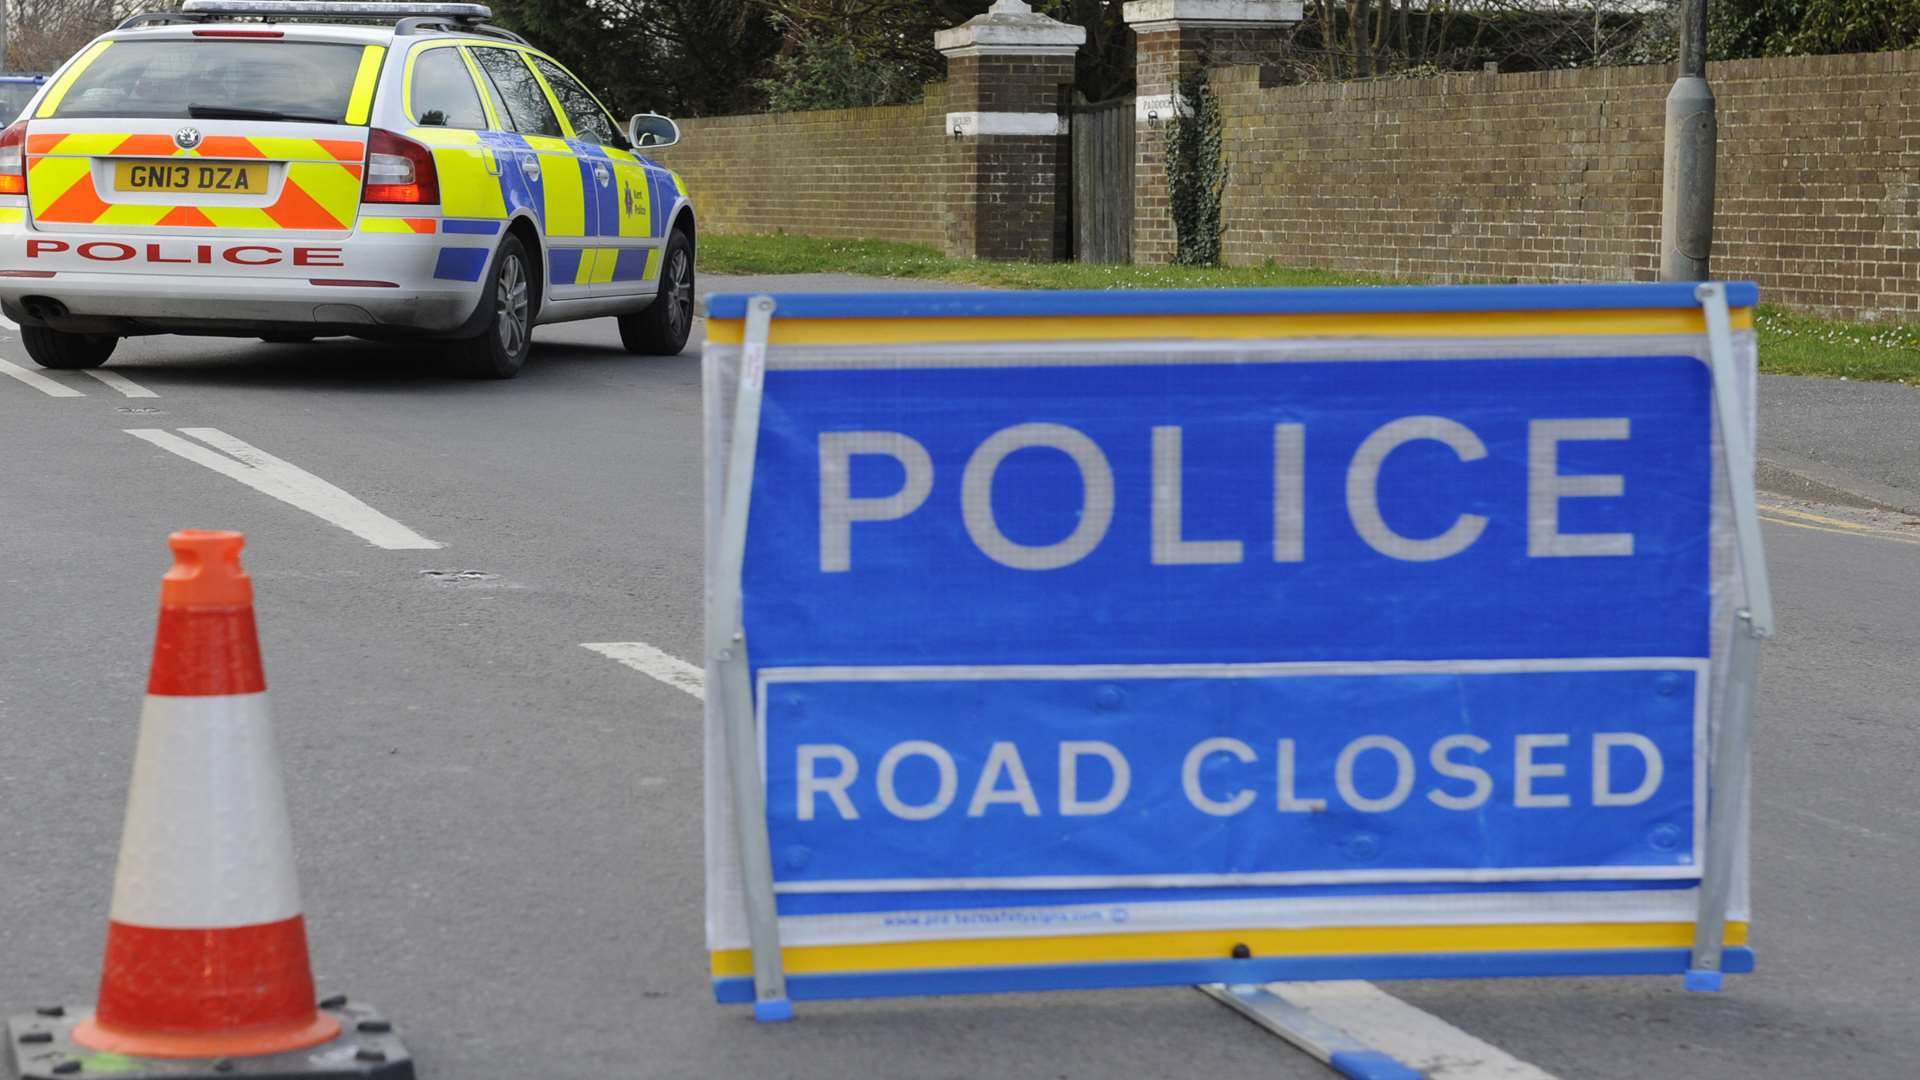 The road is closed while officers deal with the accident. Stock image